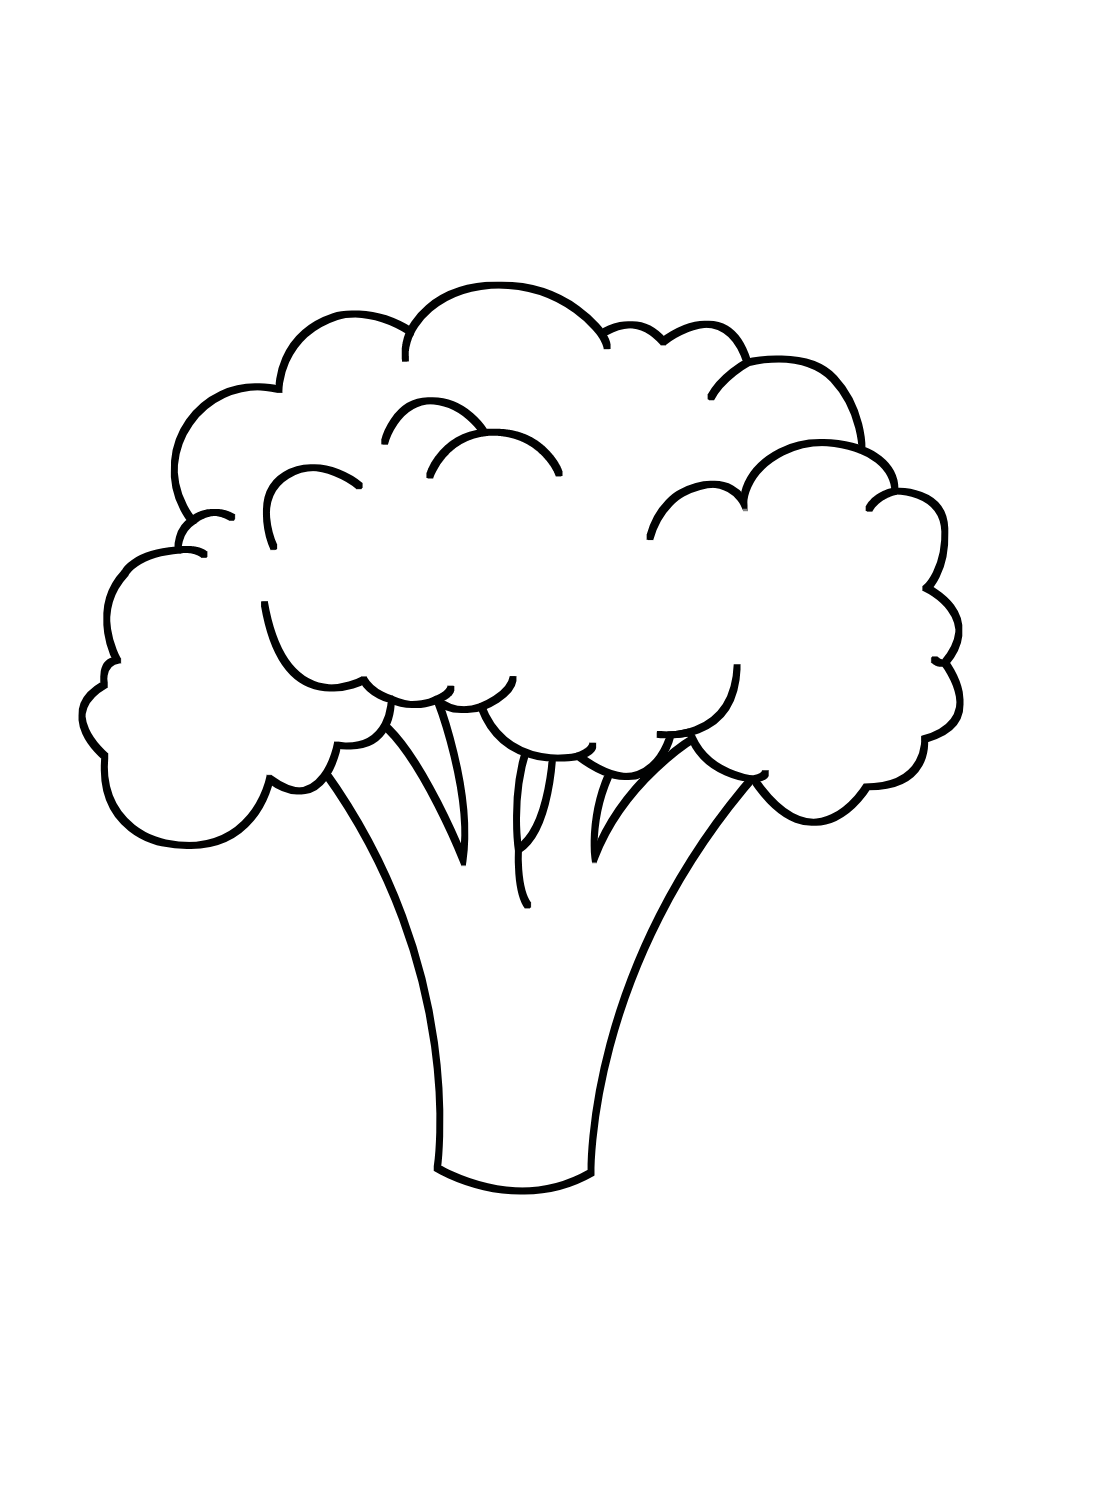 Green Broccoli Coloring Pages